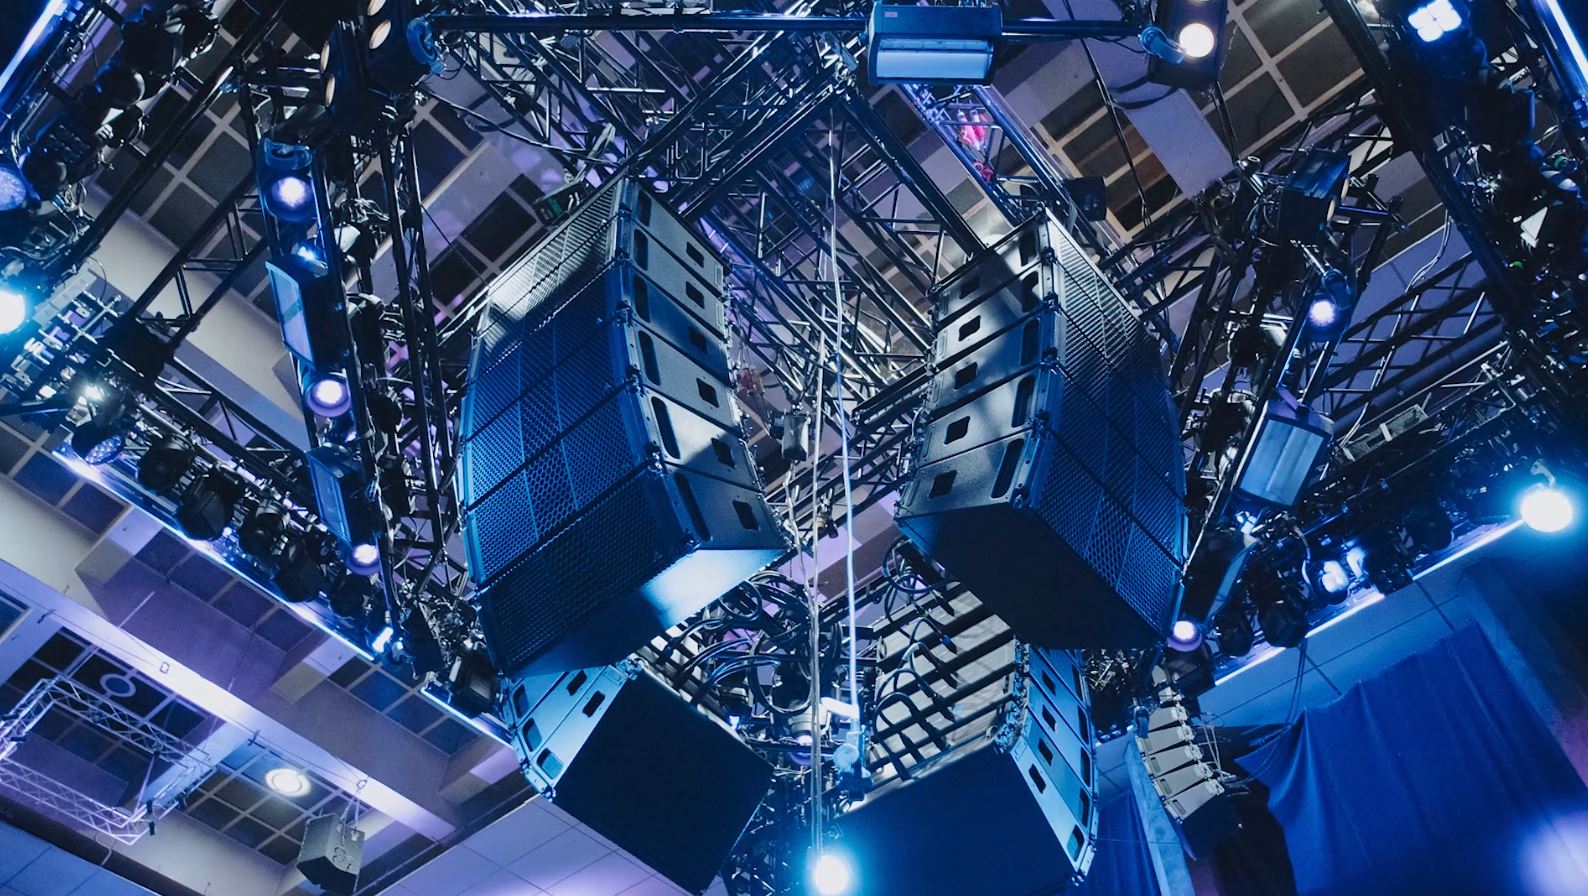 Speakers hanging from the ceiling at a venue.